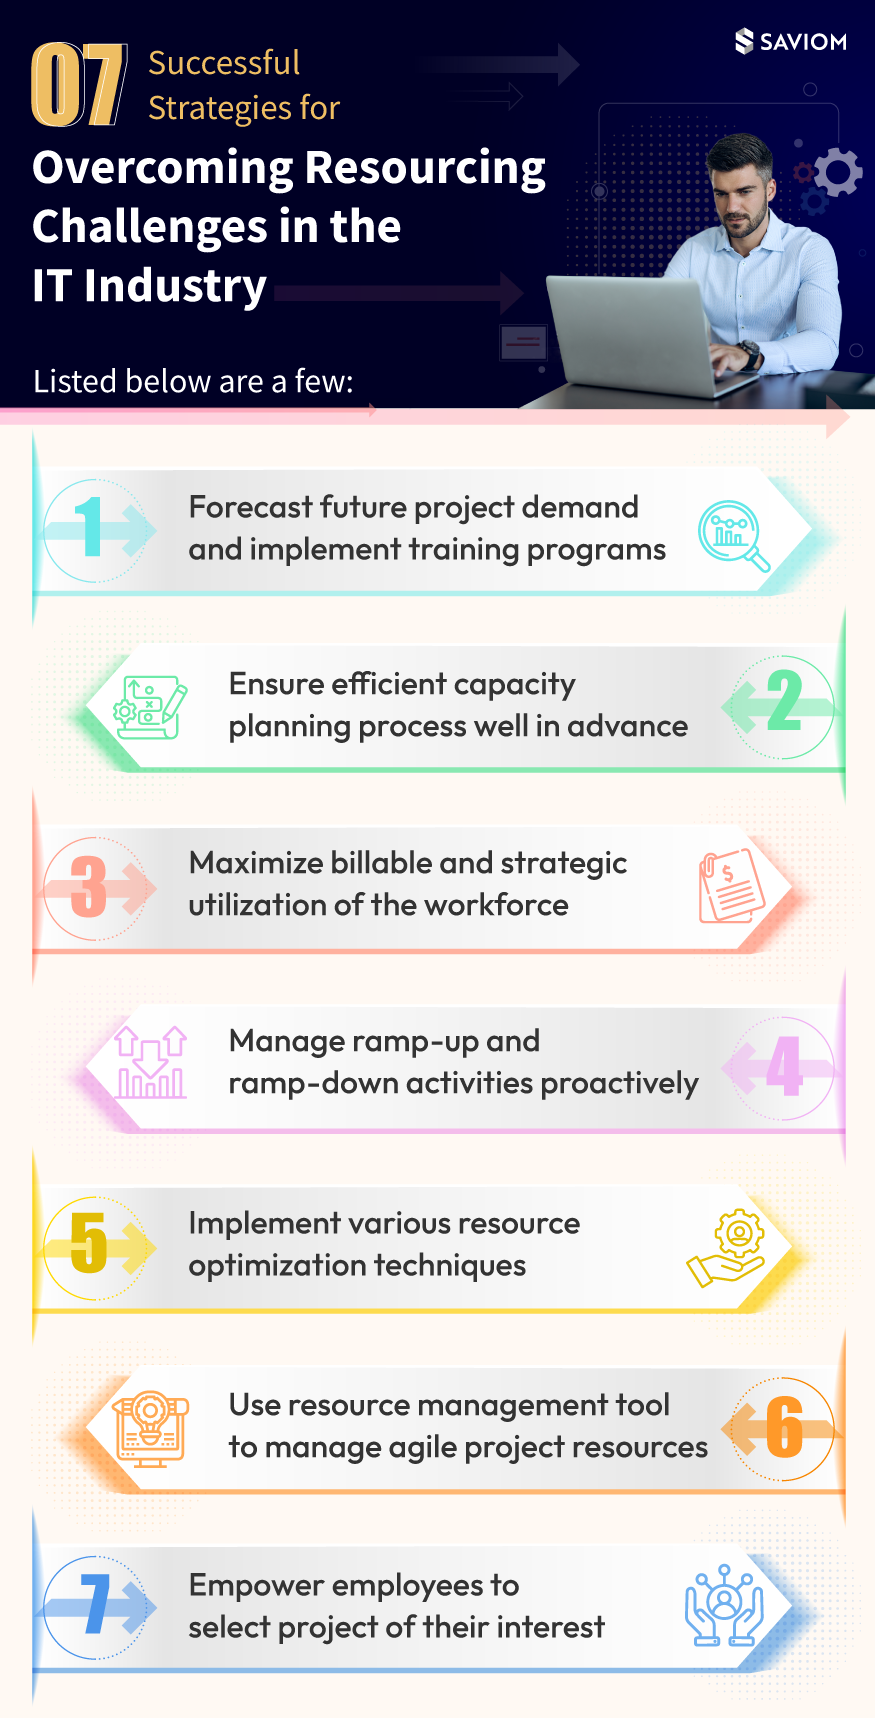 Successful Strategies for Overcoming Resourcing Challenges in the IT Industry-infographic